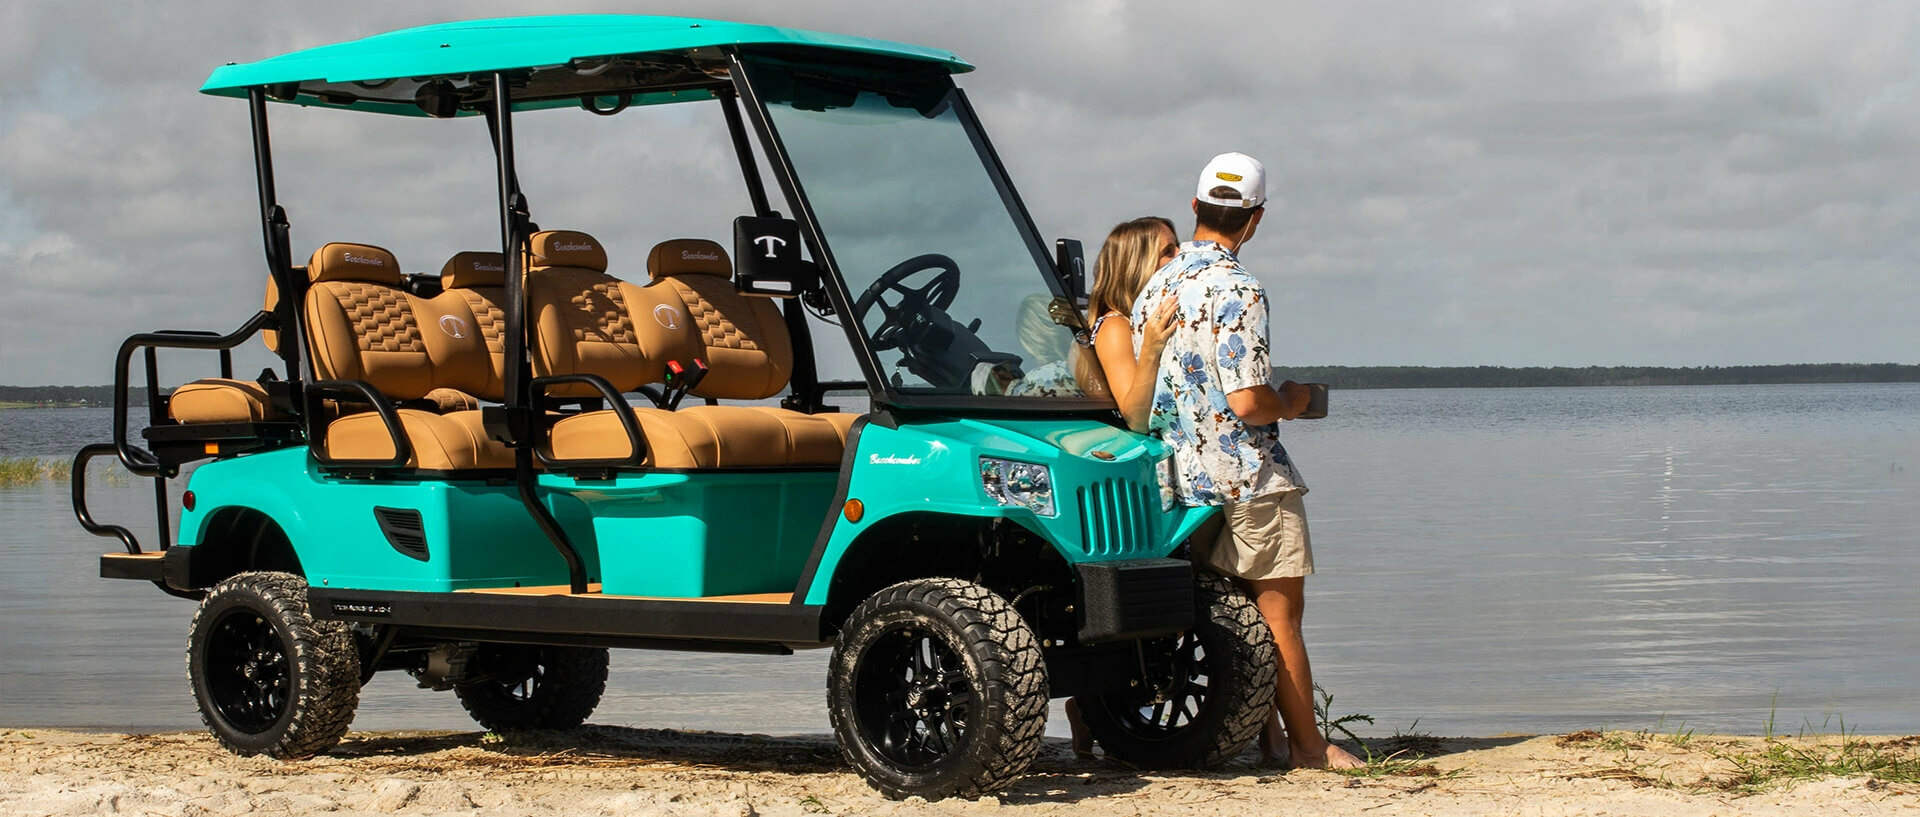 Tomberlin Golf Cart on Beach with Couple